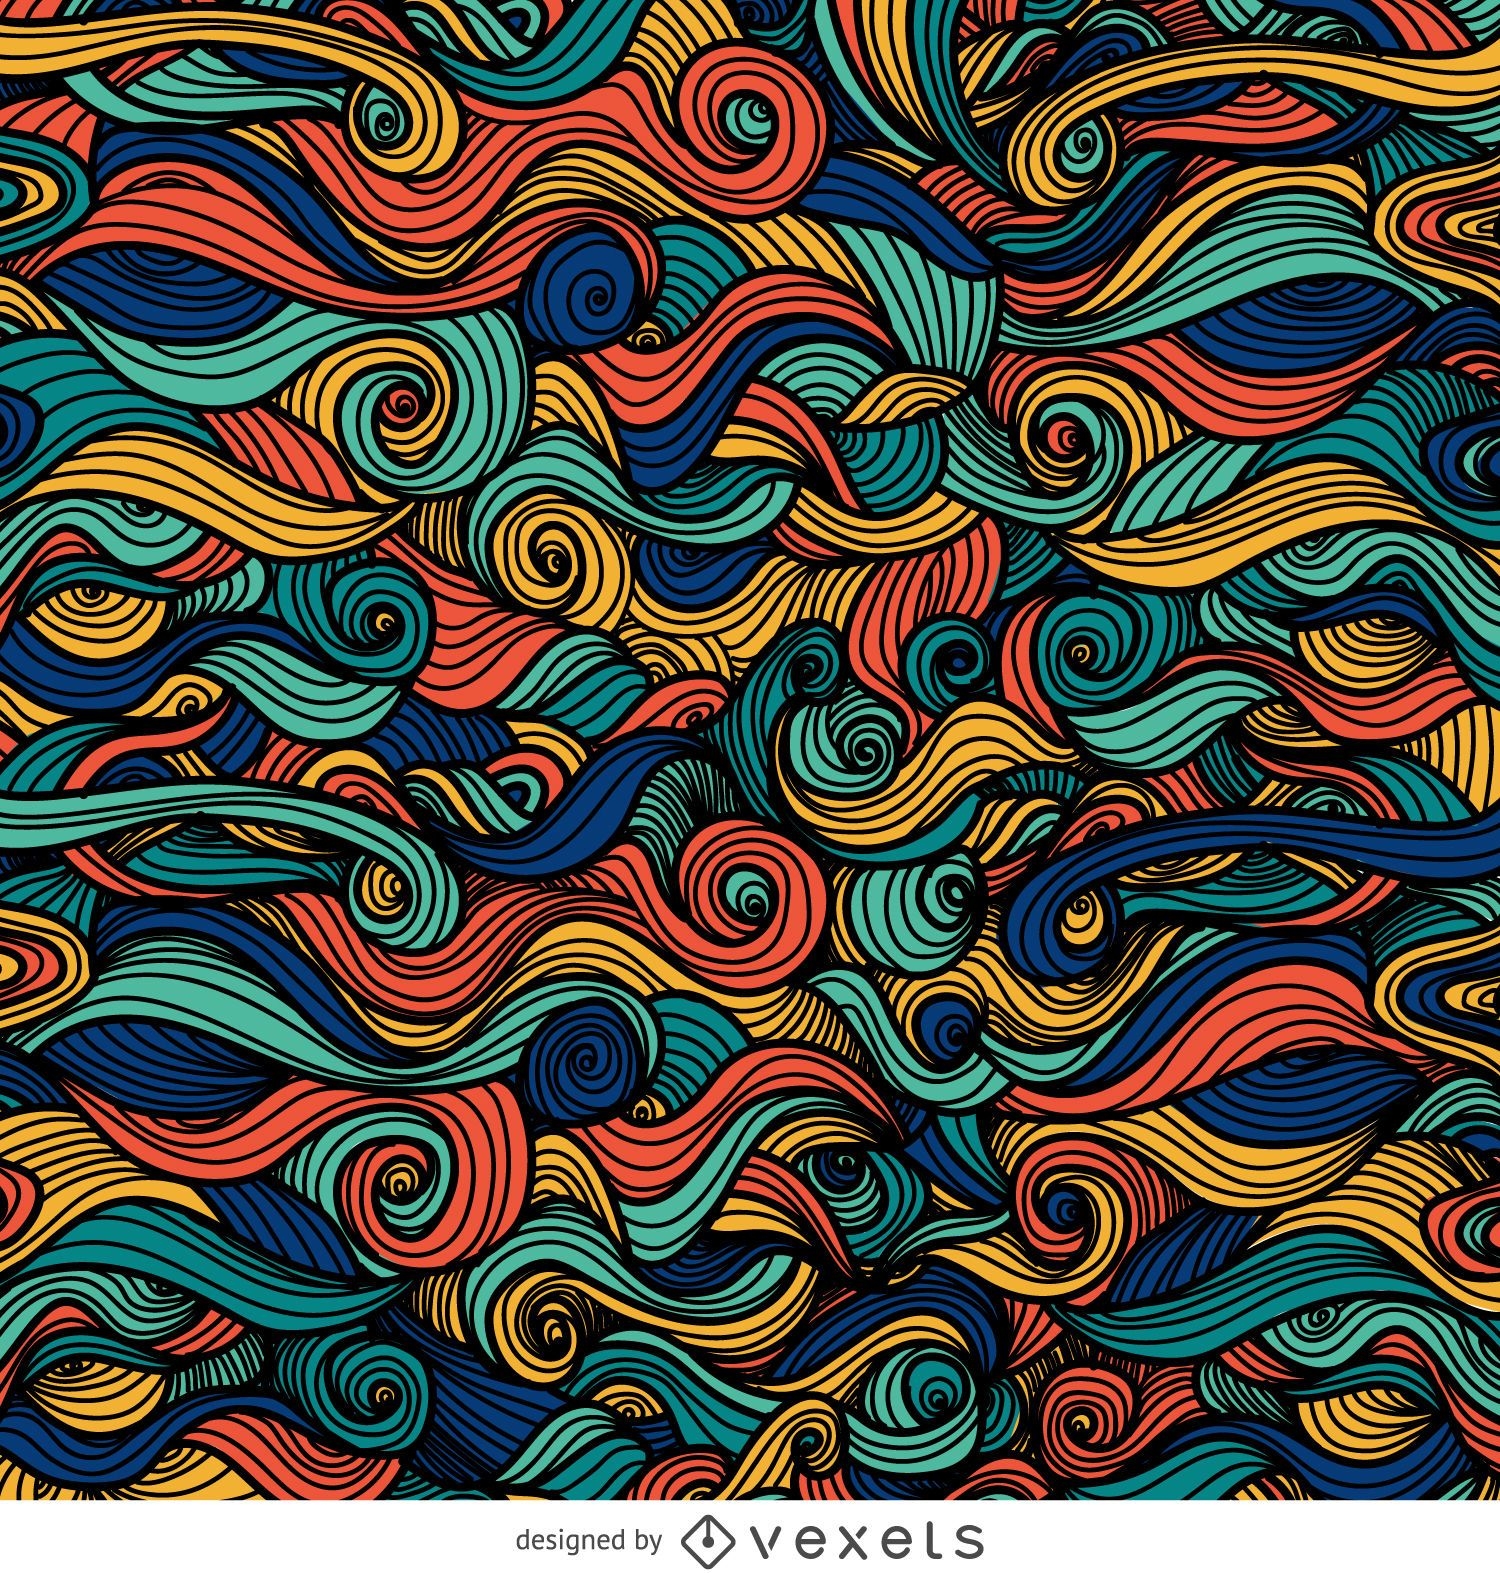 Colorful ornamental curly swirls background